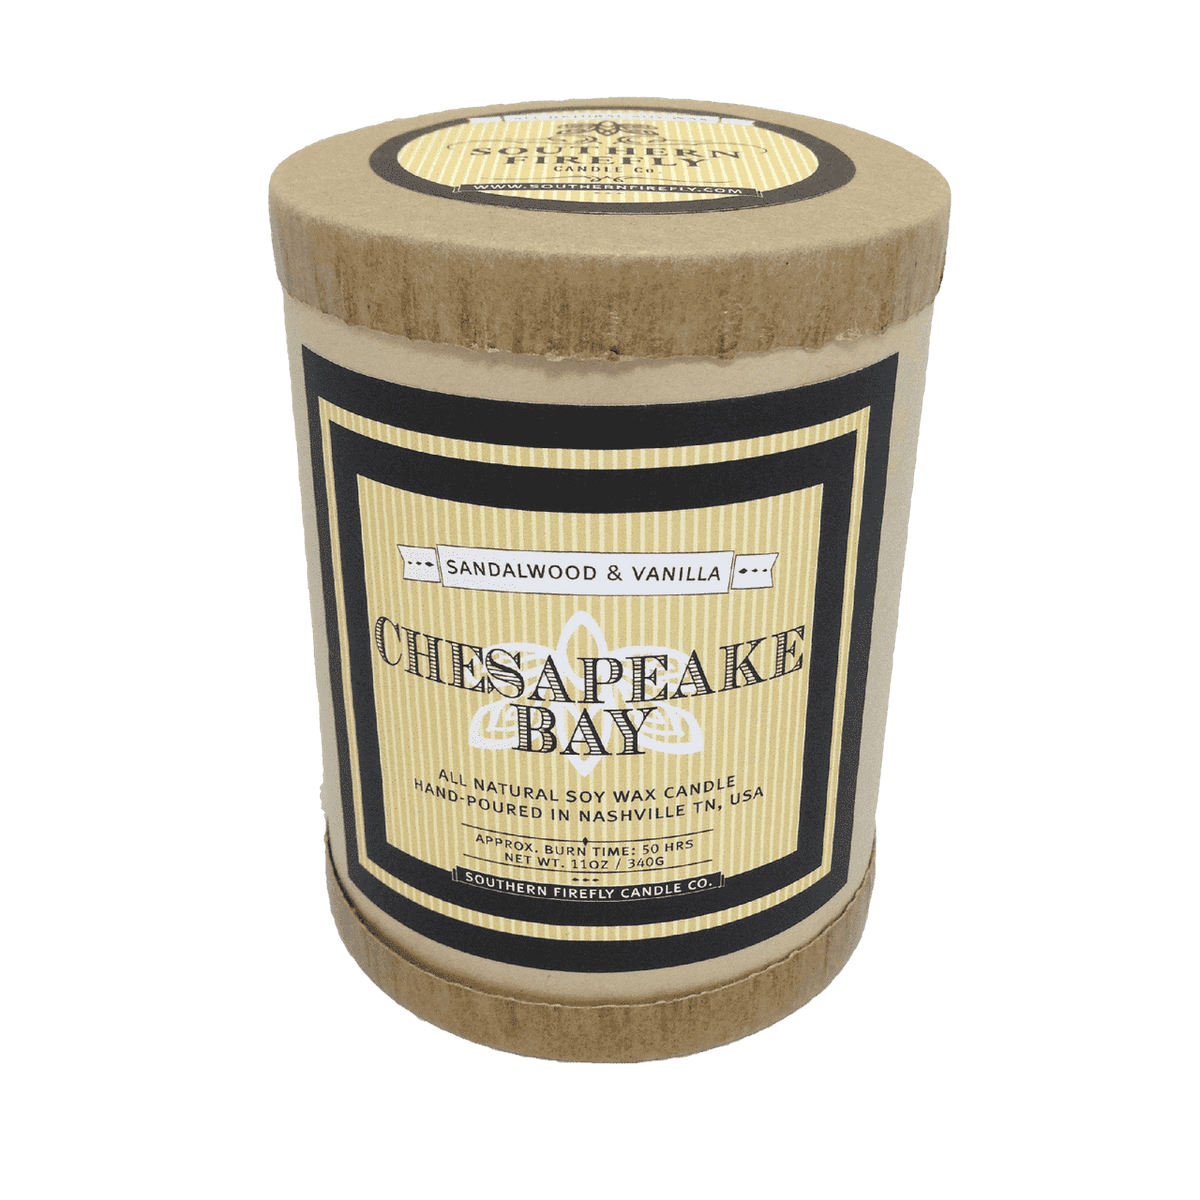 Chesapeake Bay Destination Series Soy Candle in Sandalwood and Vanilla Scent by Southern Firefly Candle Co. - Country Club Prep